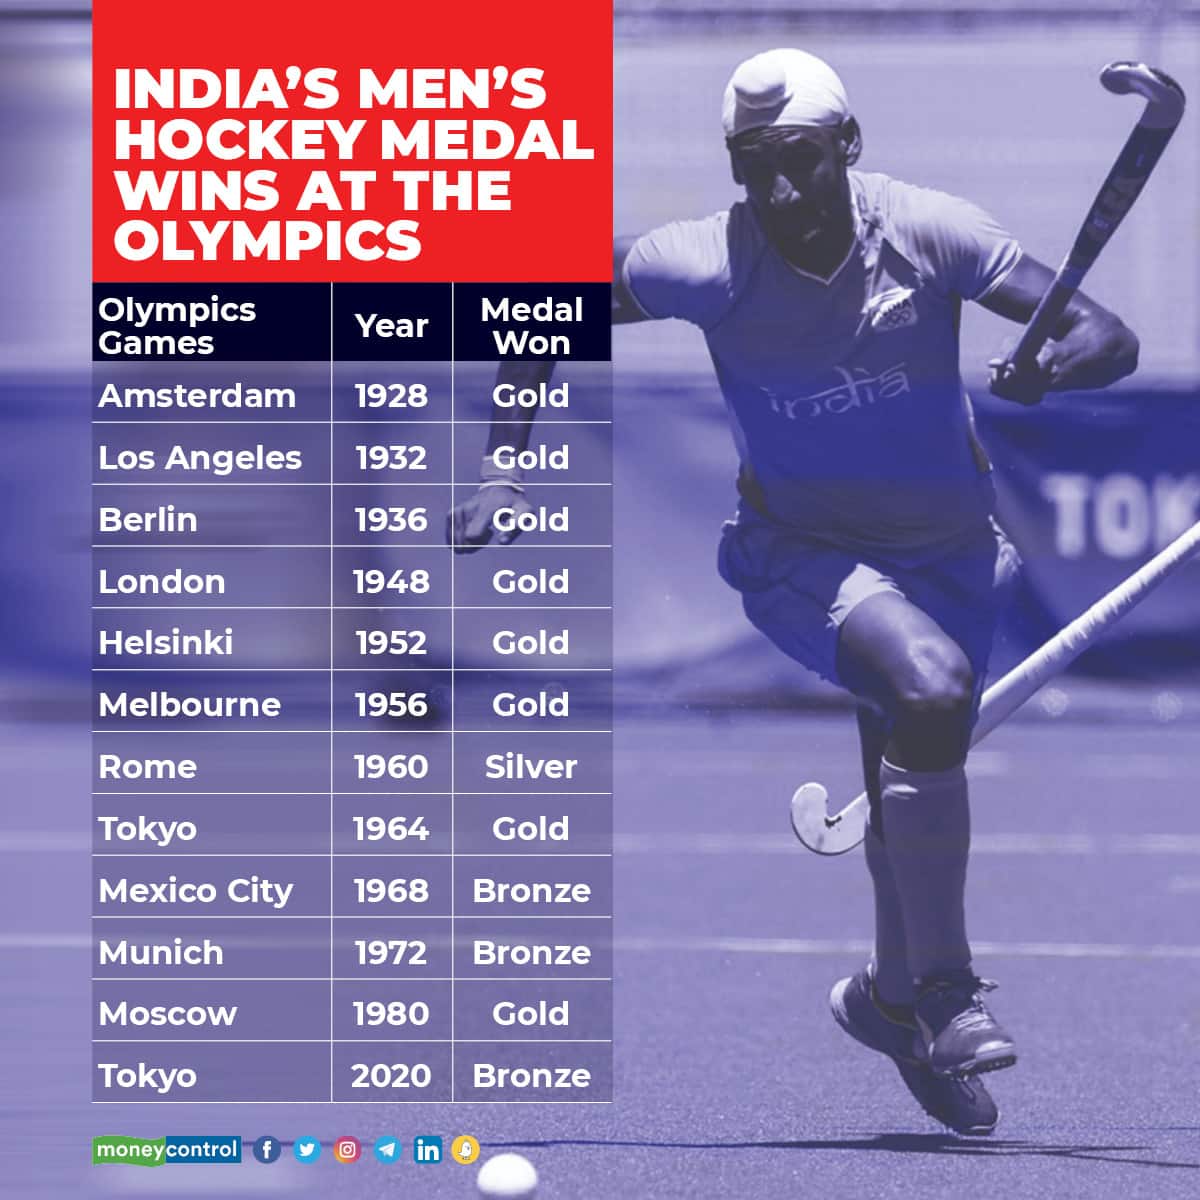 Tokyo 2020 Olympics: India's 41 years wait ends as they defeat